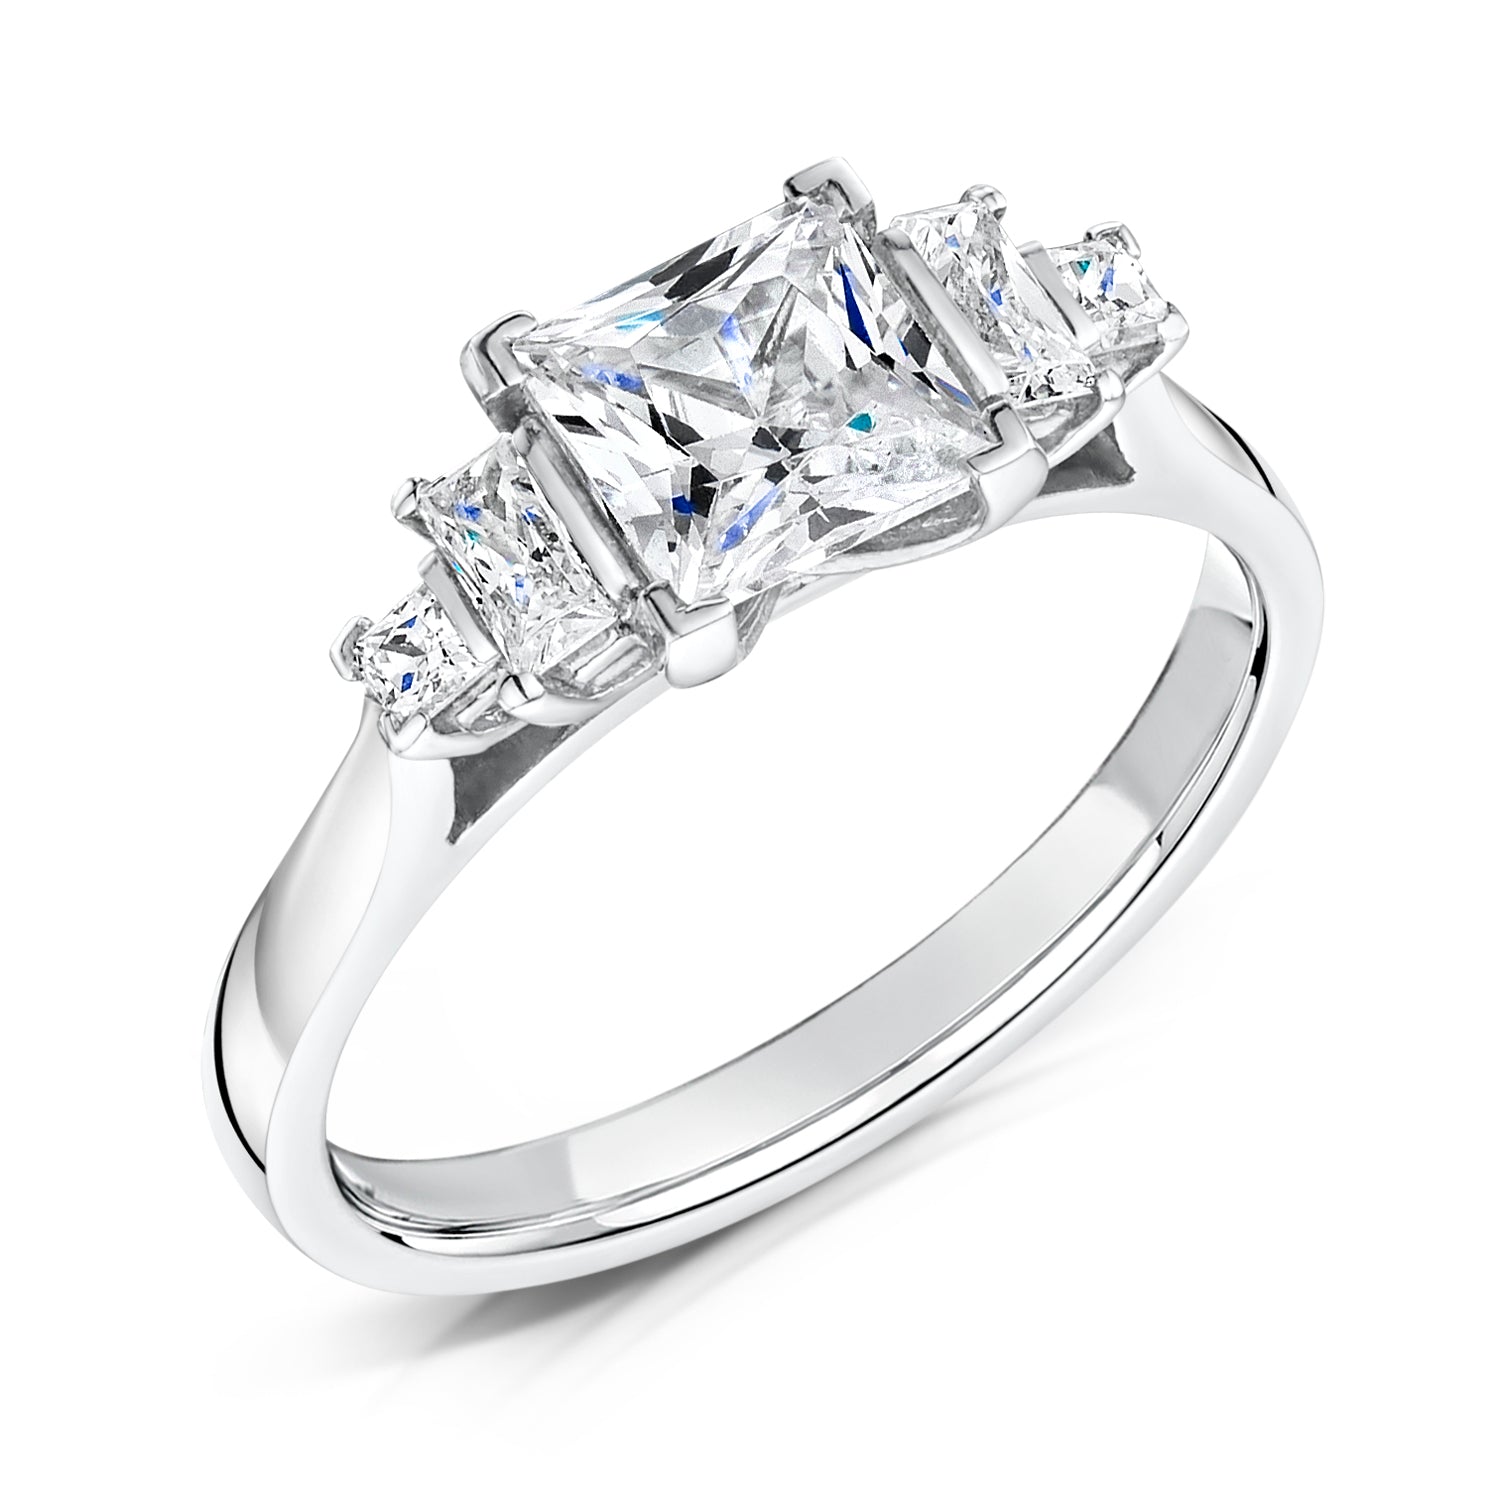 PRINCESS AND BAGUETTE  DIAMOND  ENGAGEMENT RING